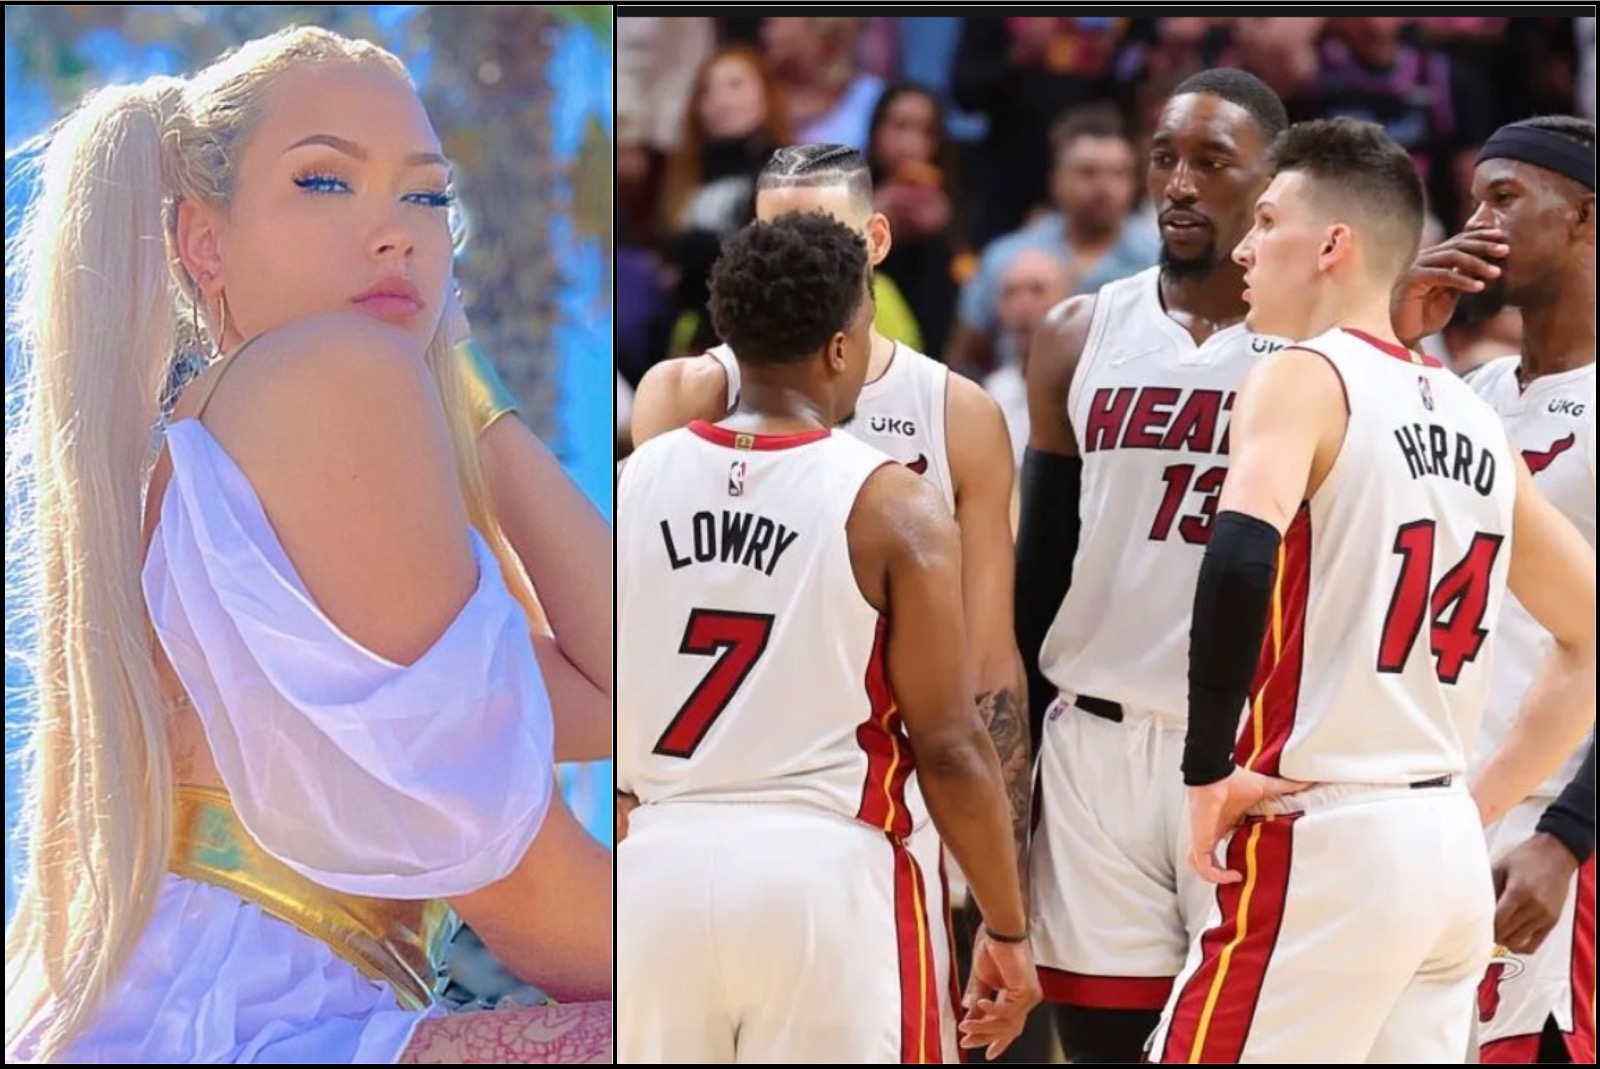 Adult Film Star Hayley Murders Says She Had Threesome With Heat Player